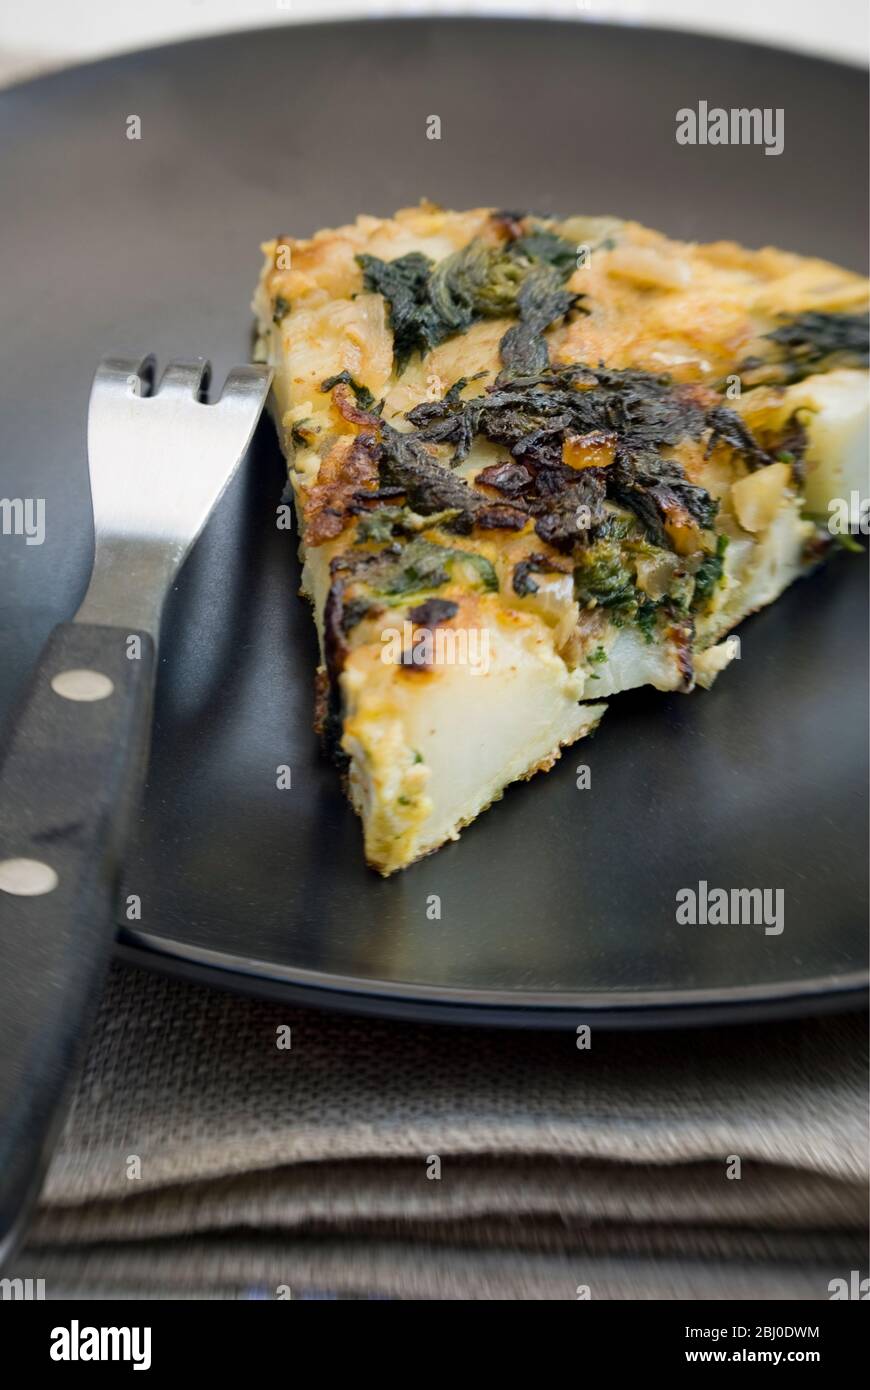 Slice of Spanish tortilla made with potatoes, onions, eggs and freshly picked springtime nettle tops - Stock Photo